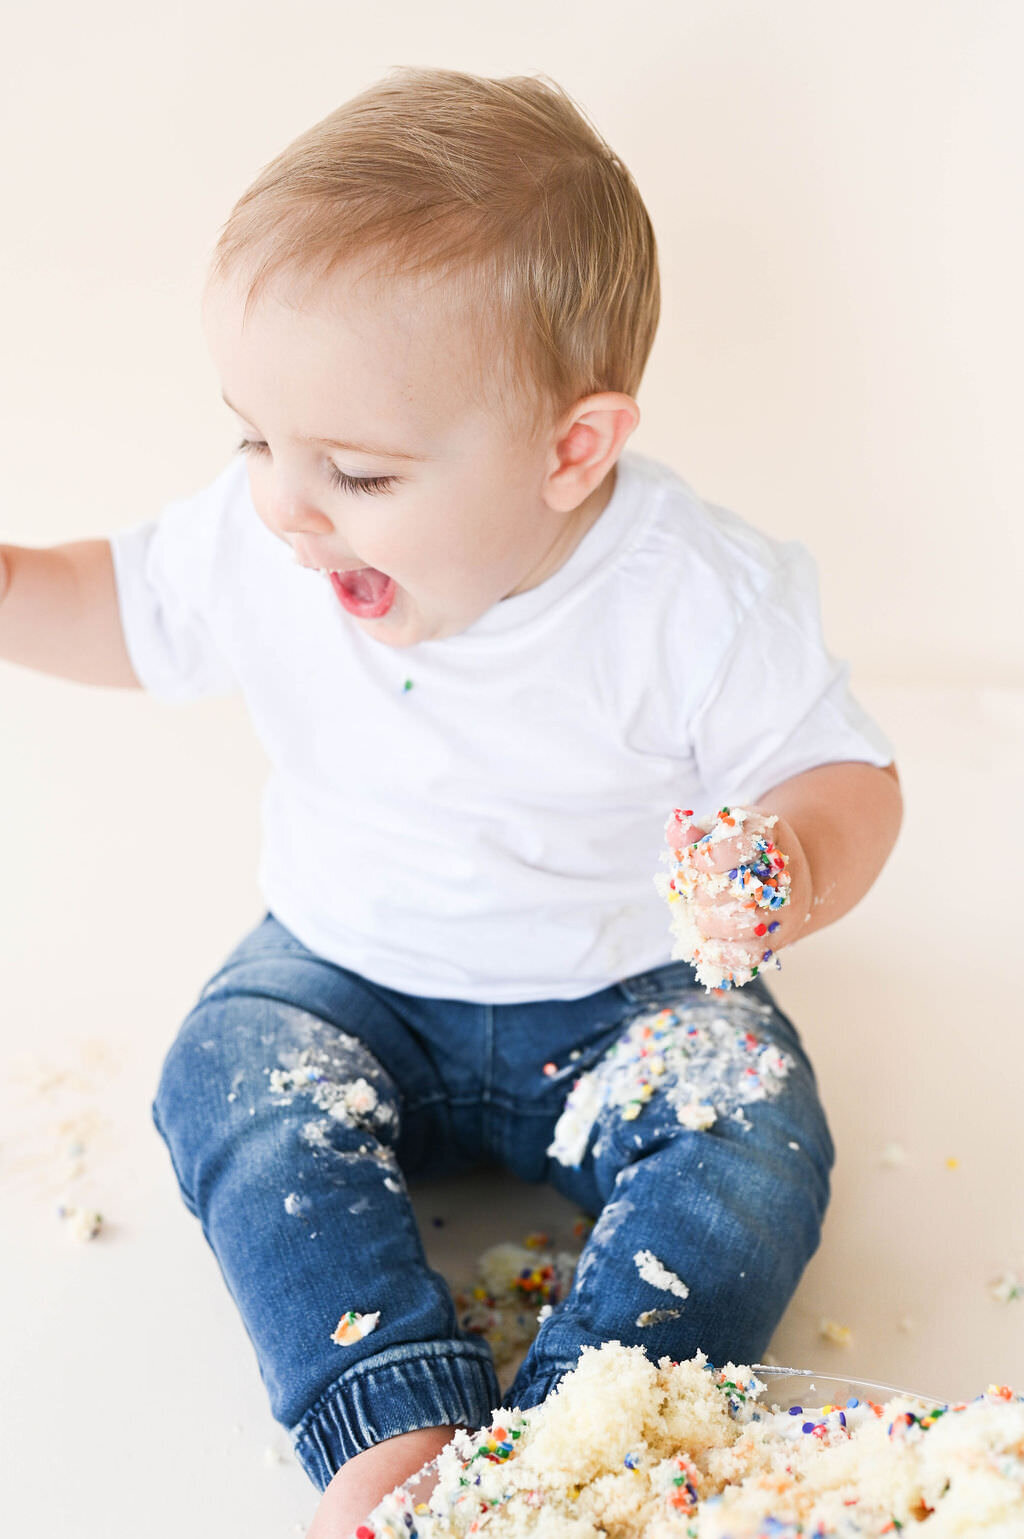 A baby playing with cake.